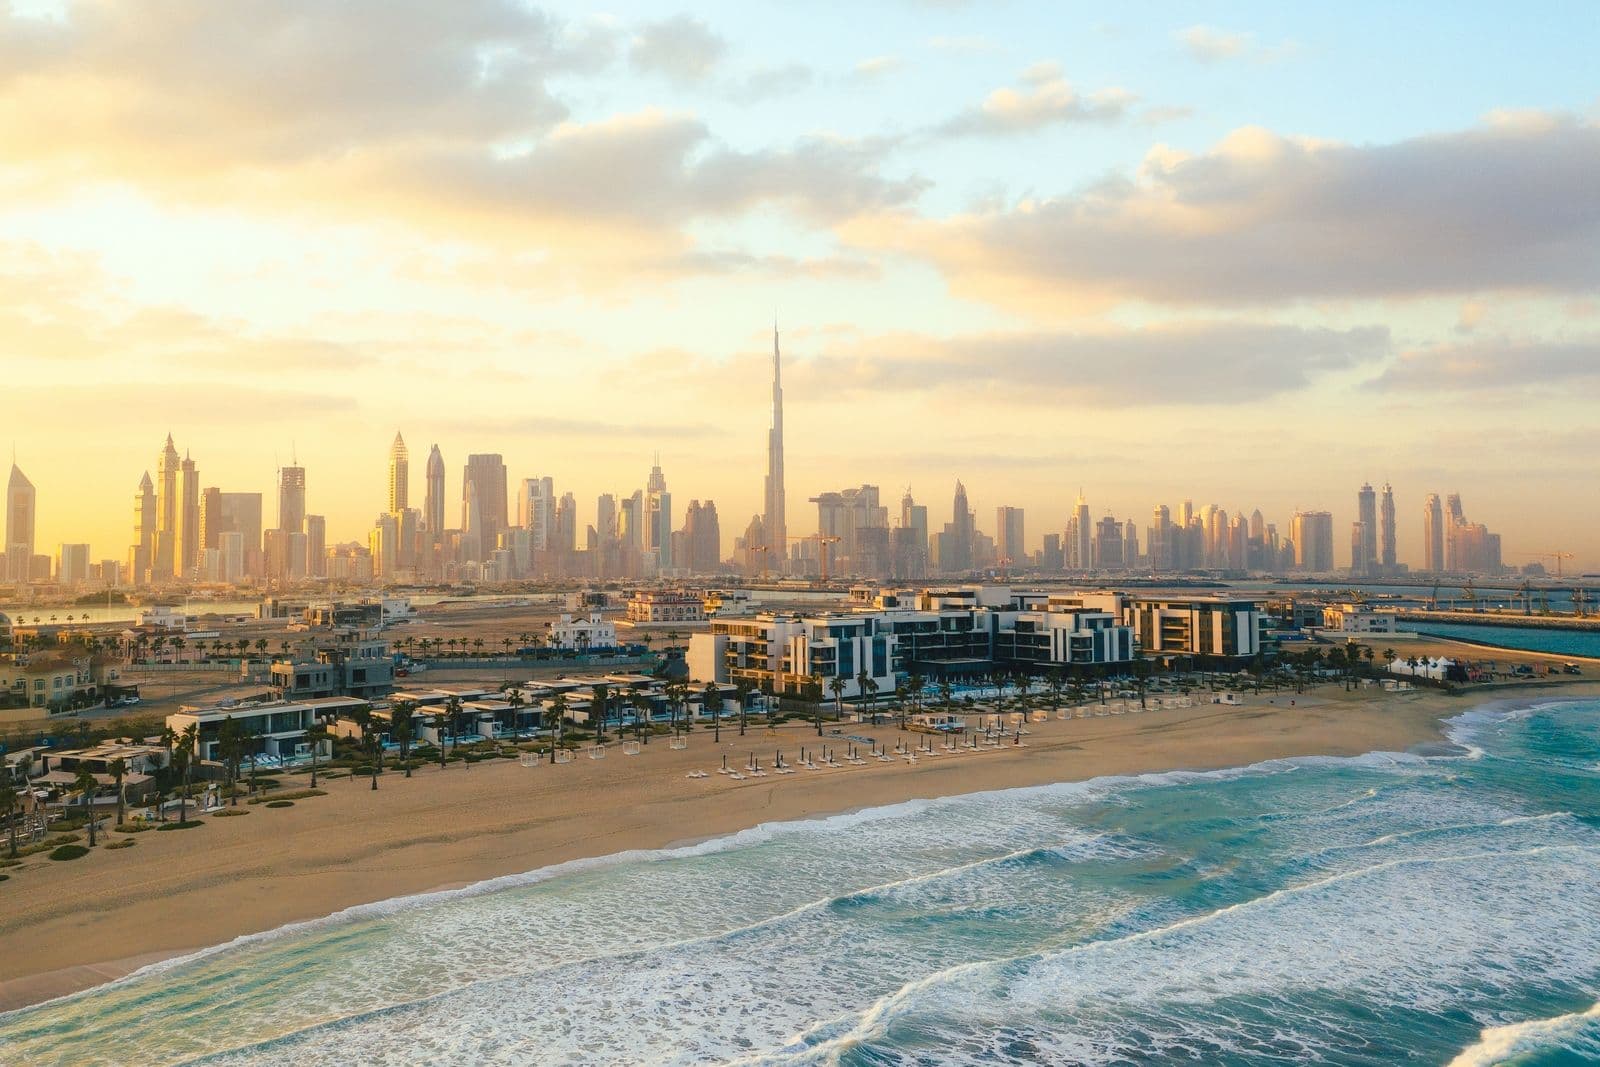 UAE’s Golden Visa Rules Come into Effect Next Month